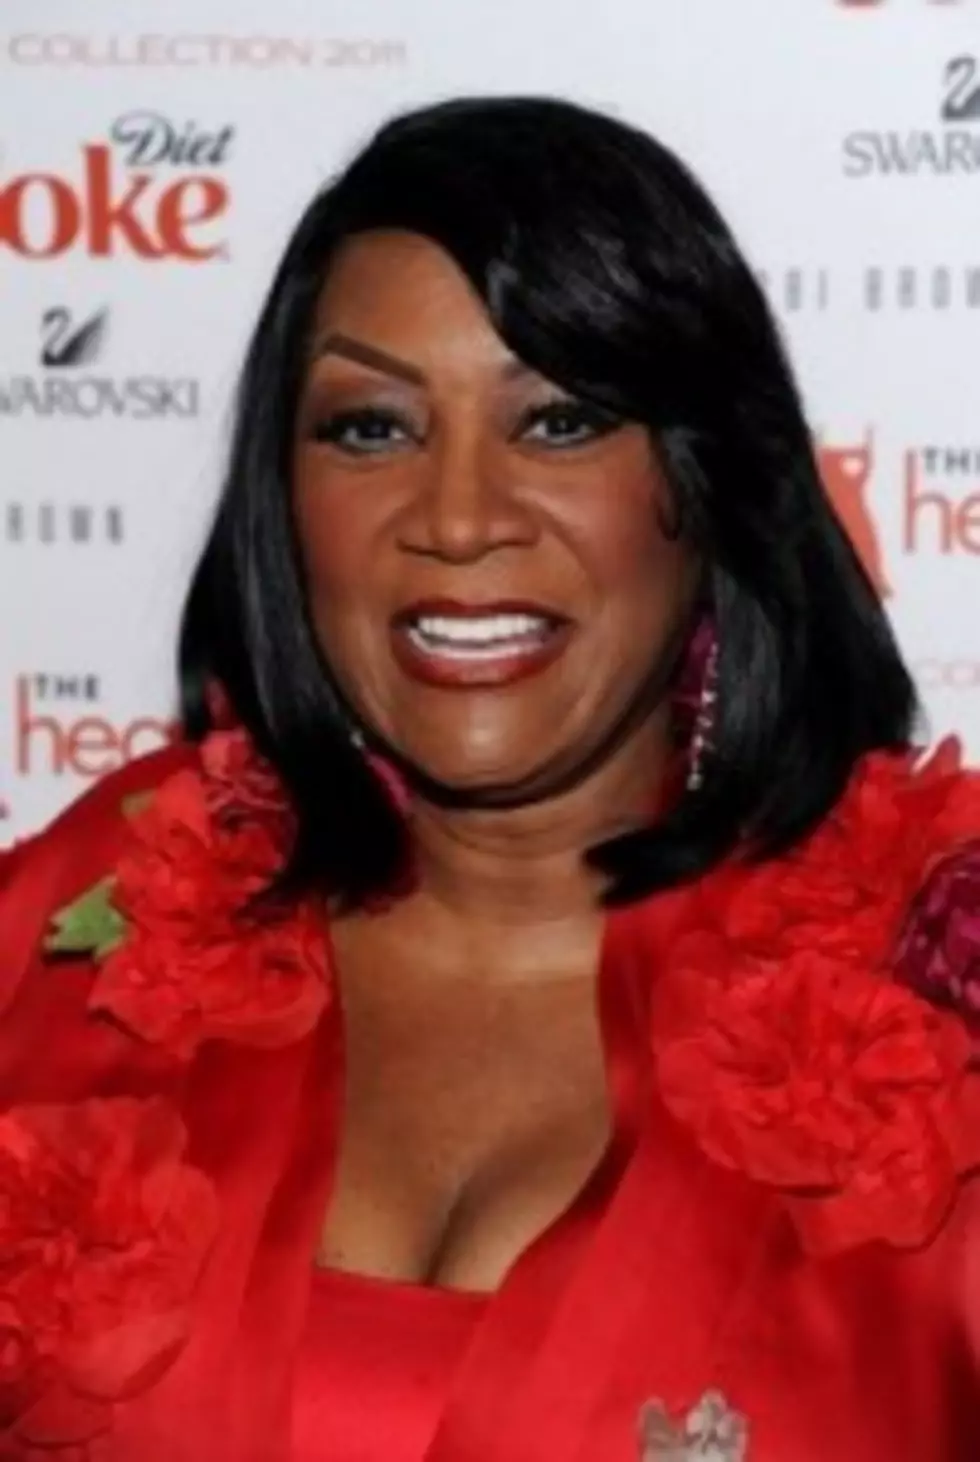 Singer Patti Labelle Being Sued by West Point Cadet Following Houston Airport Attack